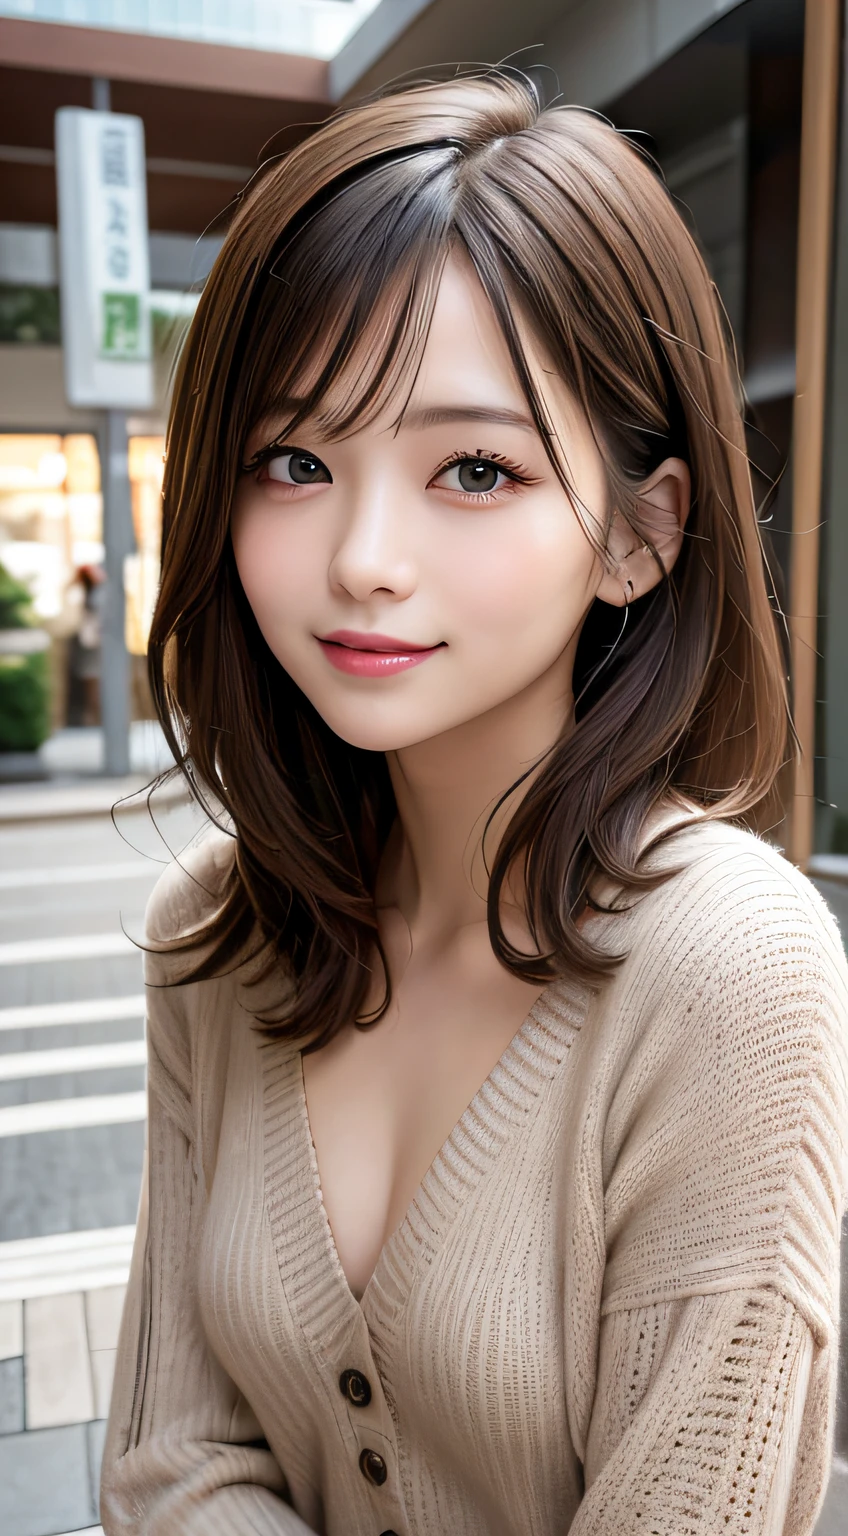 masutepiece, Best Quality, Illustration, Ultra-detailed, finely detail, hight resolution, 8K Wallpaper, Perfect dynamic composition, Beautiful detailed eyes, Winter casual wear,Medium Hair,tiny chest、Natural Color Lip, Bold sexy poses,Smile,Harajuku、20 years girl、Cute、Sexy shot looking at camera